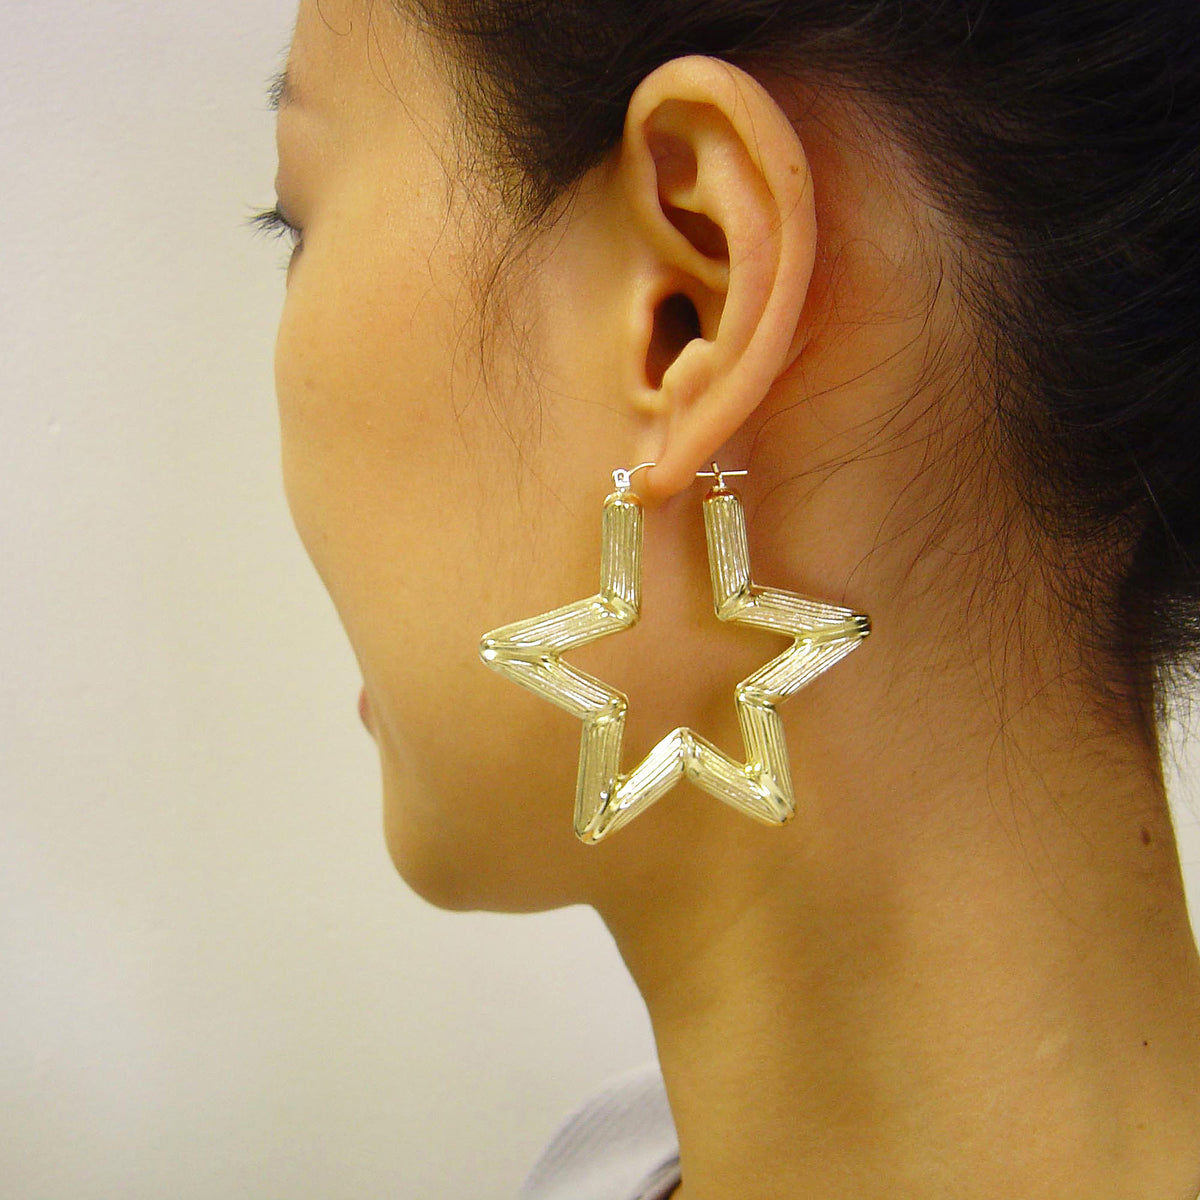 Real 10K Gold Star Hallow Bamboo Earrings Fine Jewelry 2.1 Inches Wide